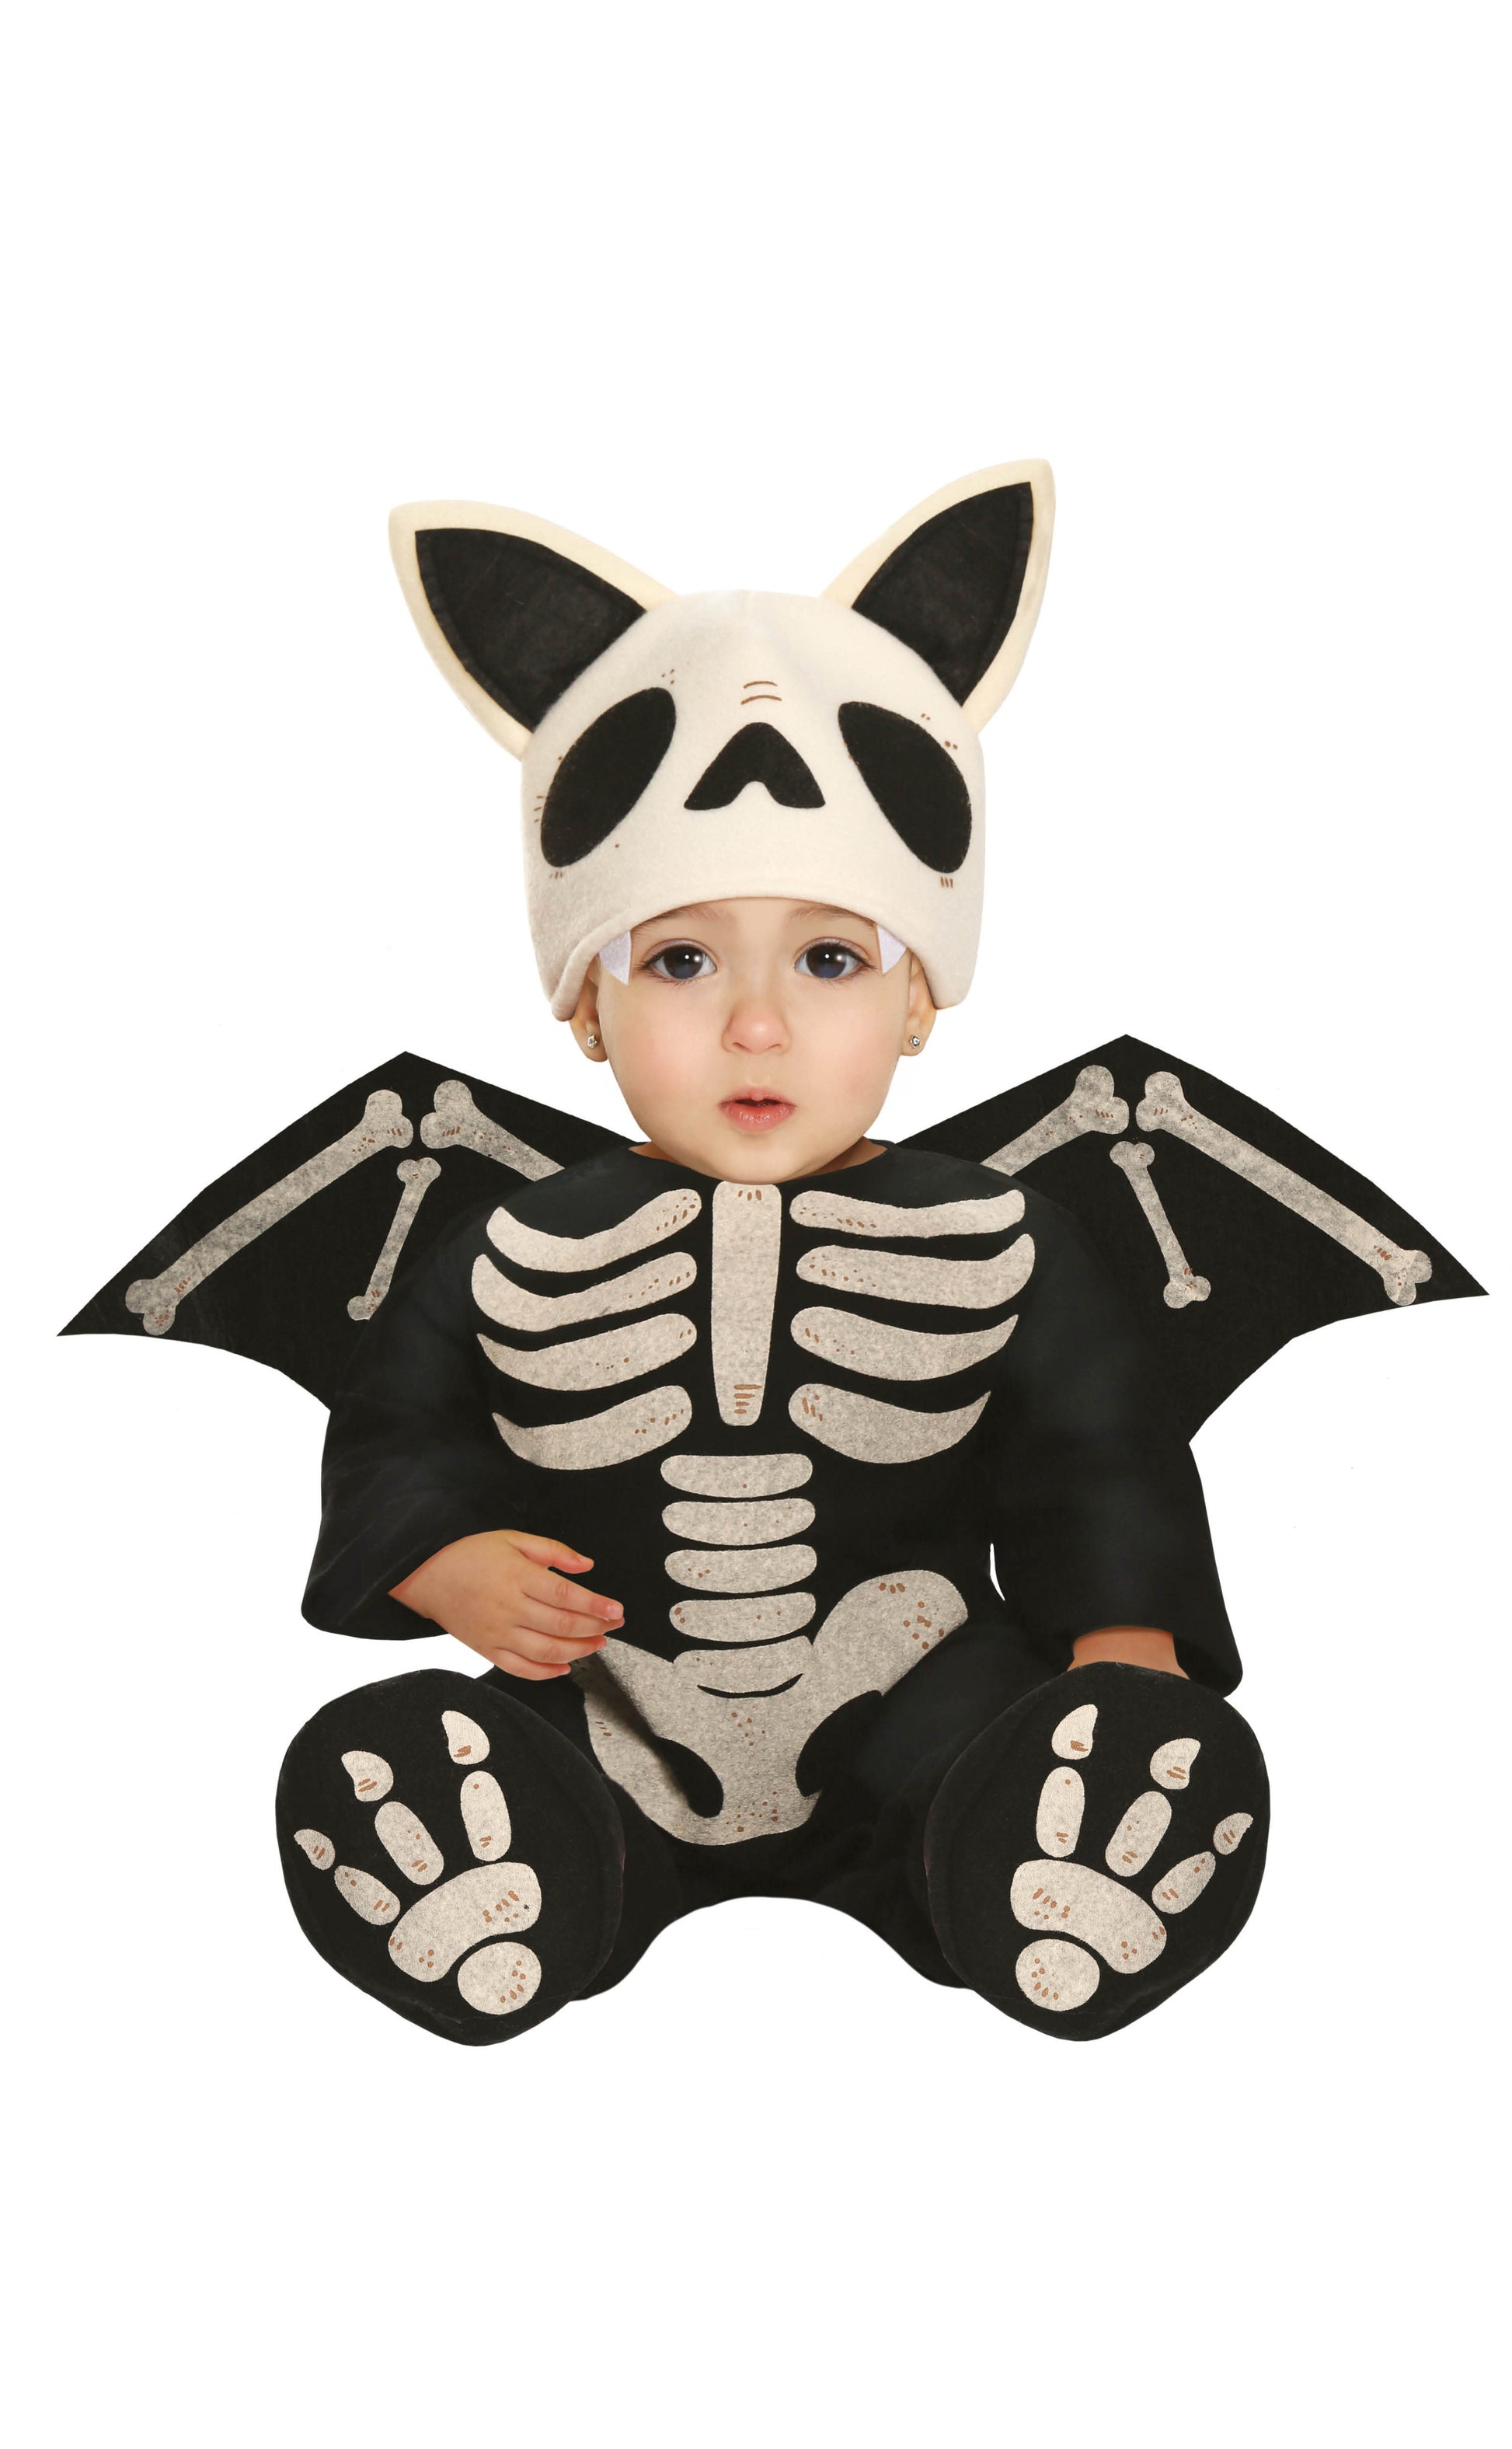 Baby Skeleton Bat Costume includes jumpsuit with wings, paws and hood